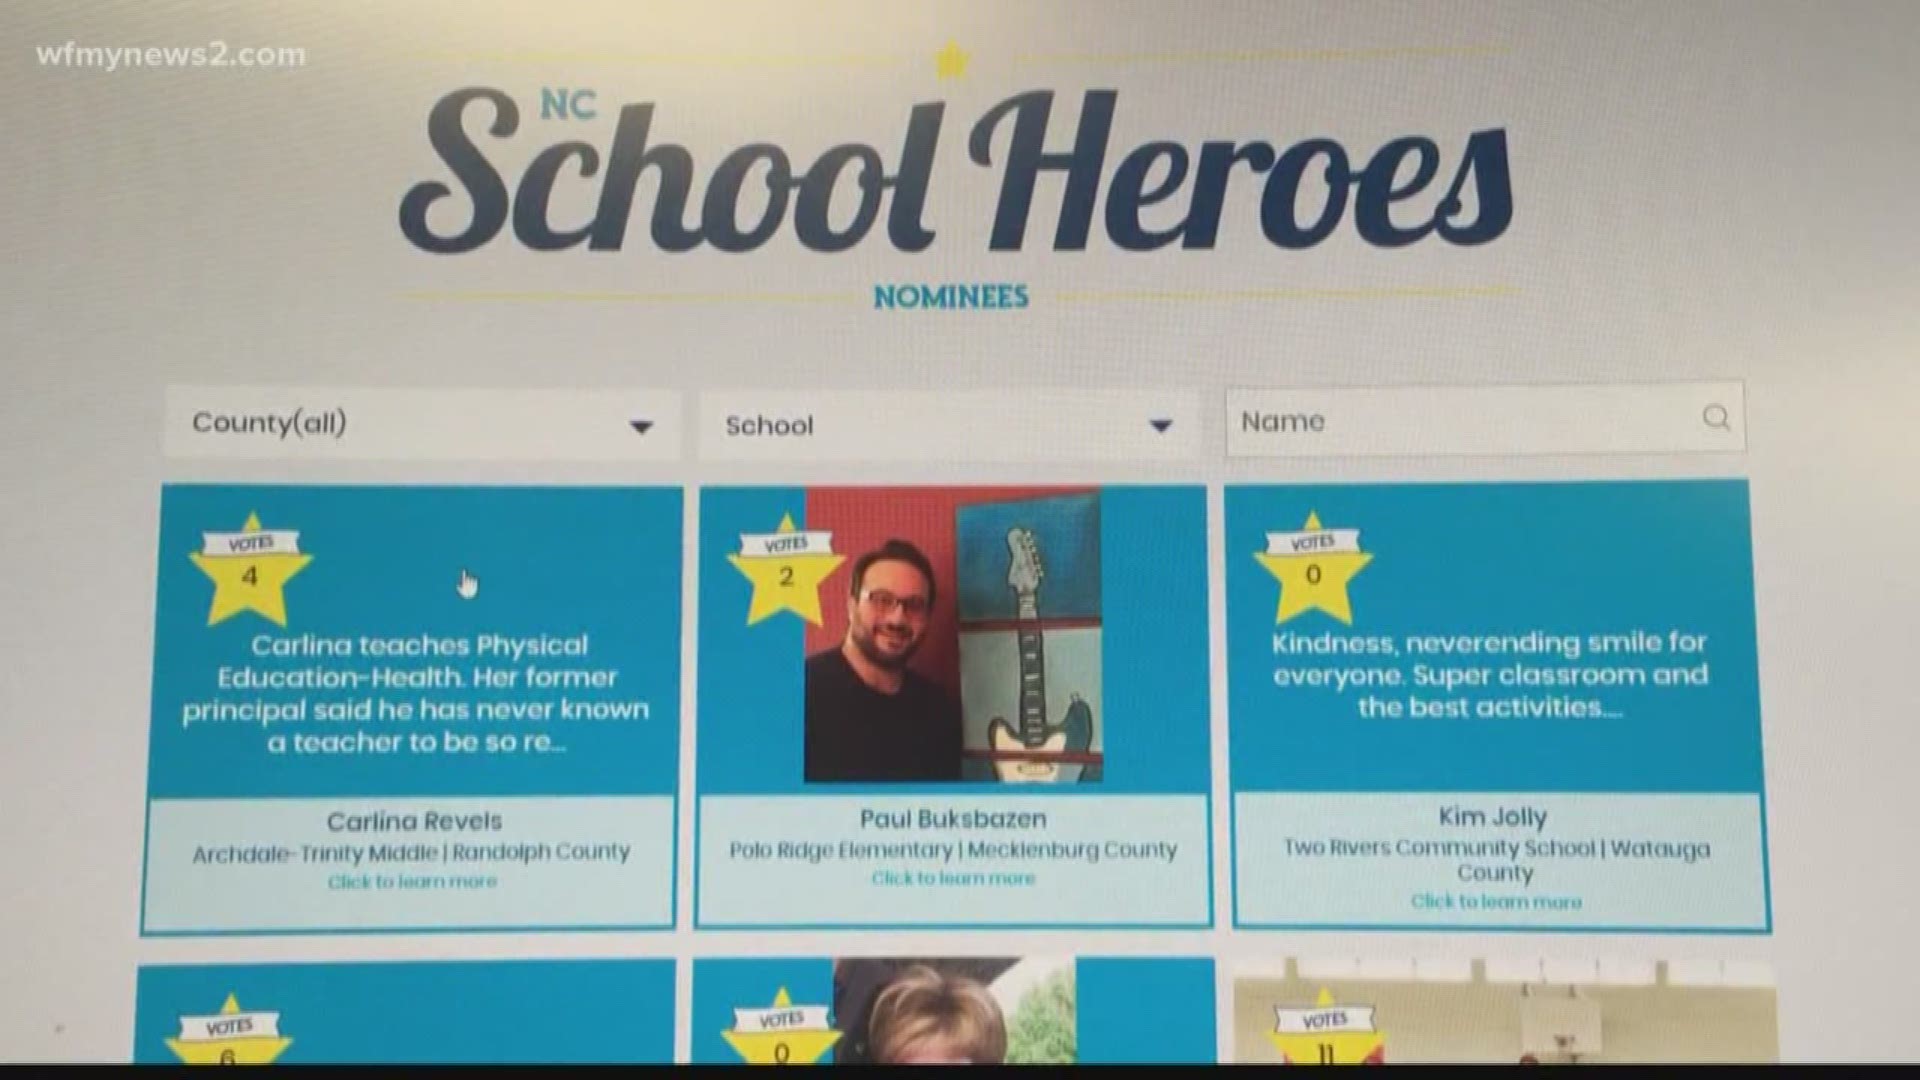 More than 5,600 teachers and school workers were nominated as School Heroes.